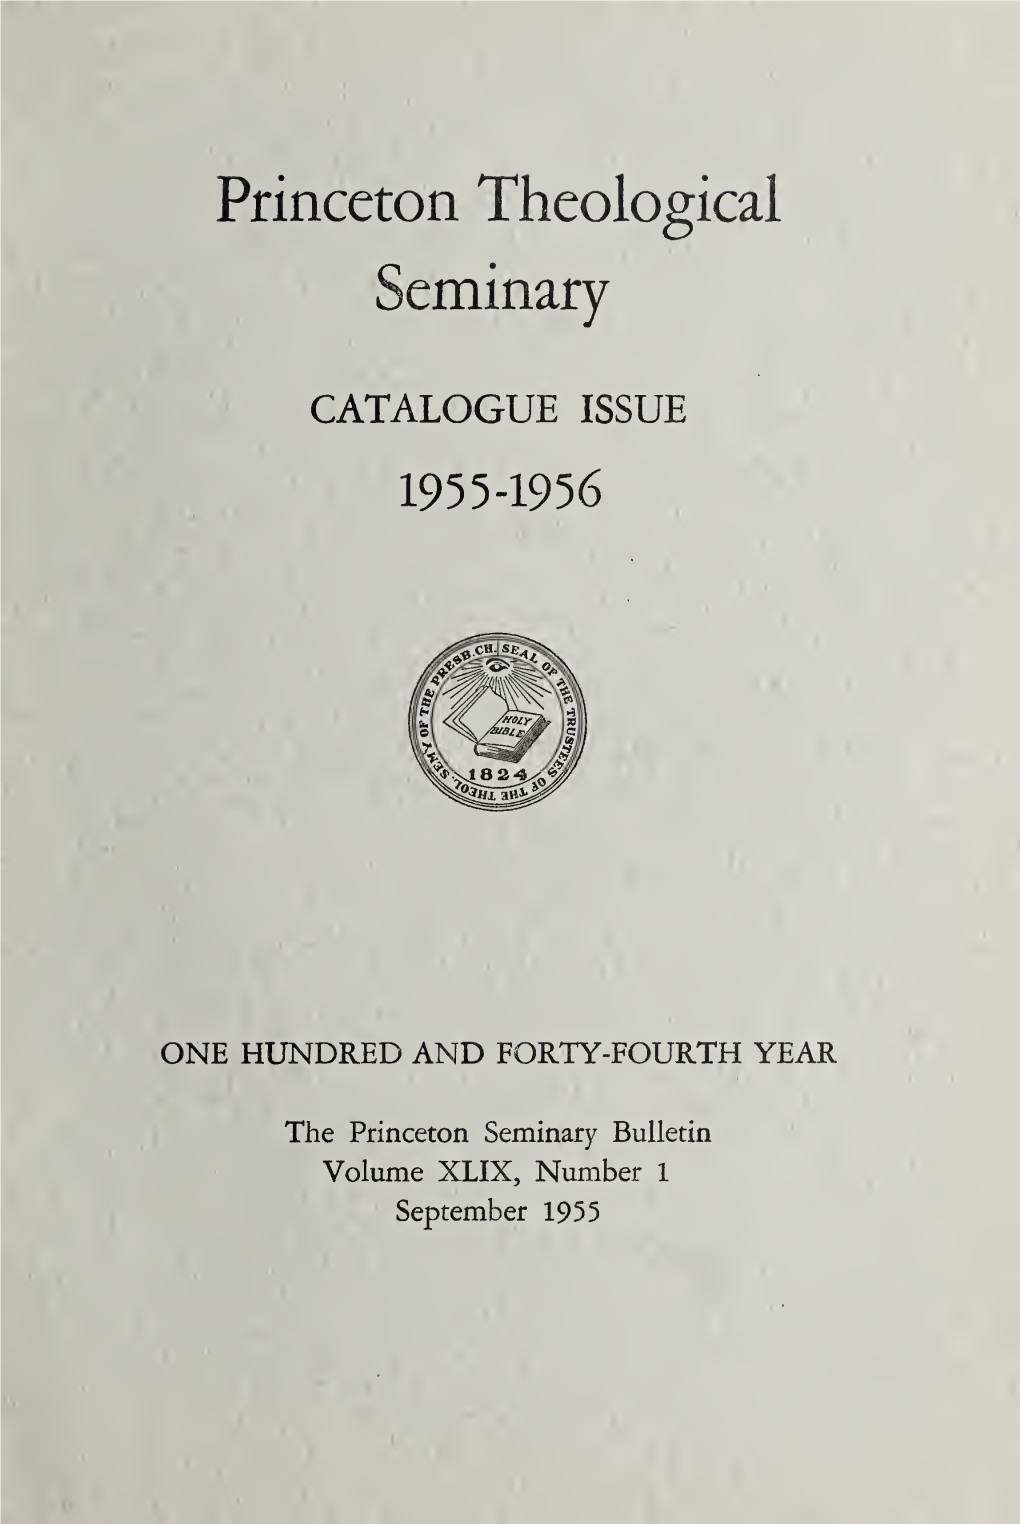 The Princeton Seminary Bulletin Volume XLIX, Number 1 September 1955 Published Quarterly by the Trustees of the Theo¬ Logical Seminary of the Presbyterian Church